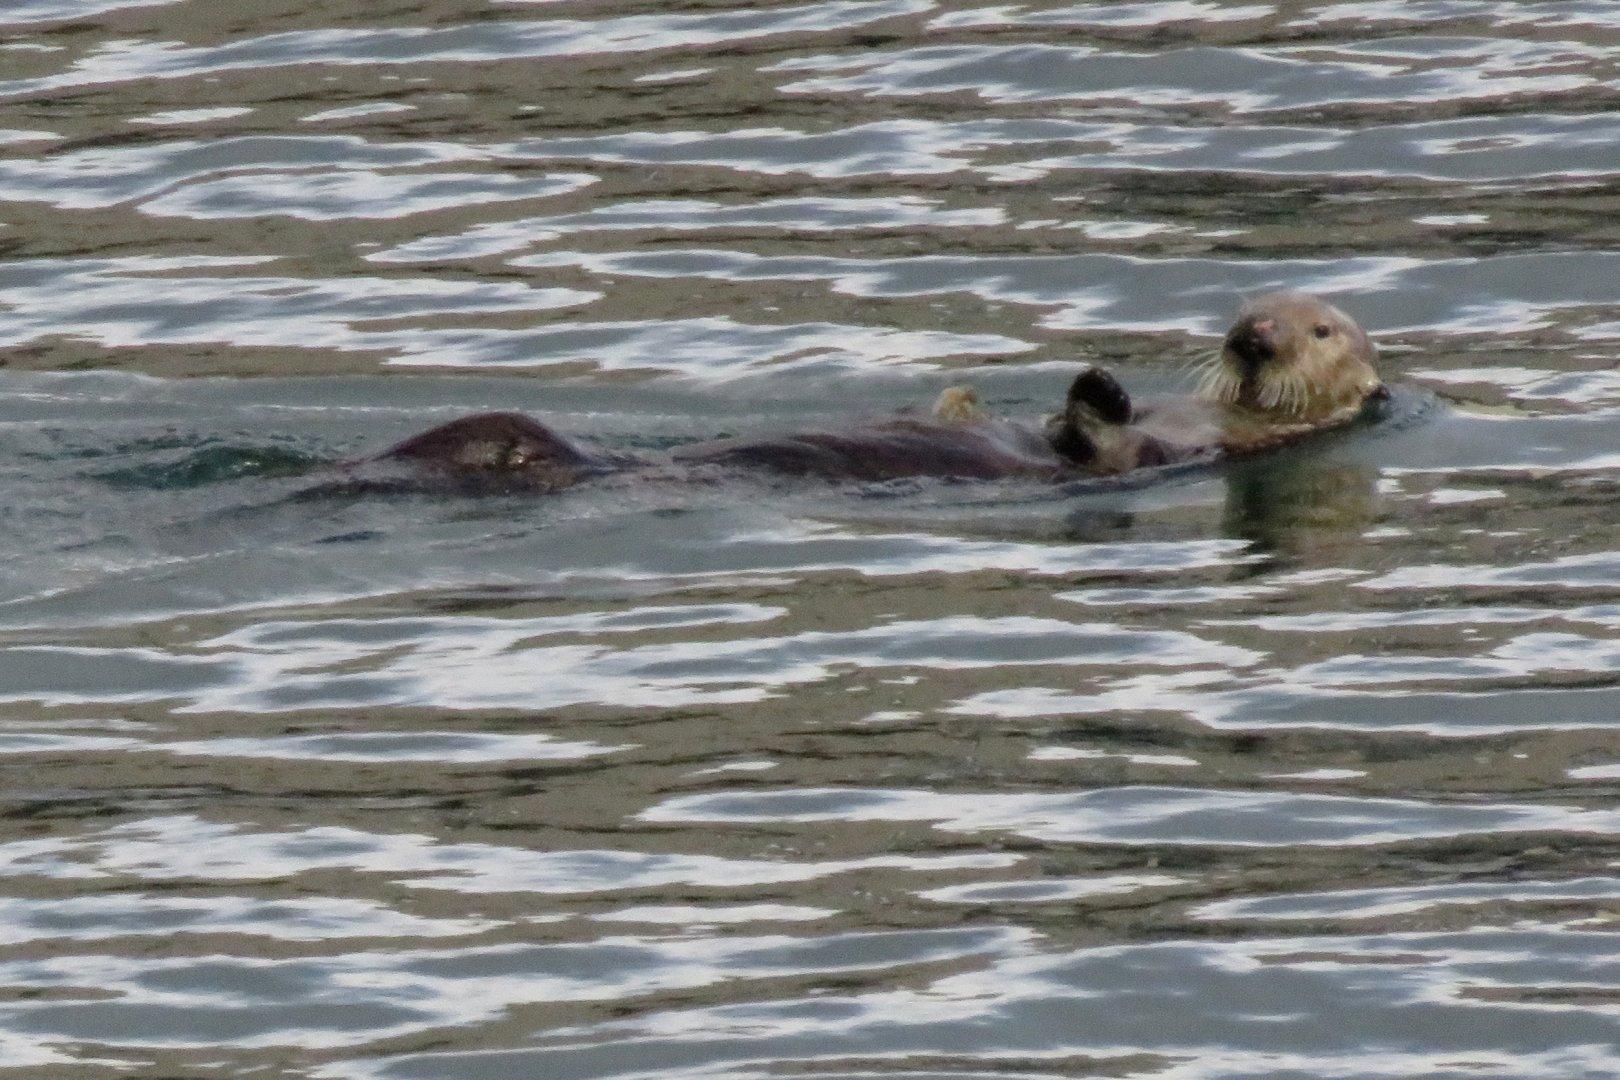 One of at least three sea otters I saw during a few minutes walking along the shoreline of Monterey Bay near Old Fisherman's Wharf last weekend. #animals #nature #otters #ocean #Monterey #California